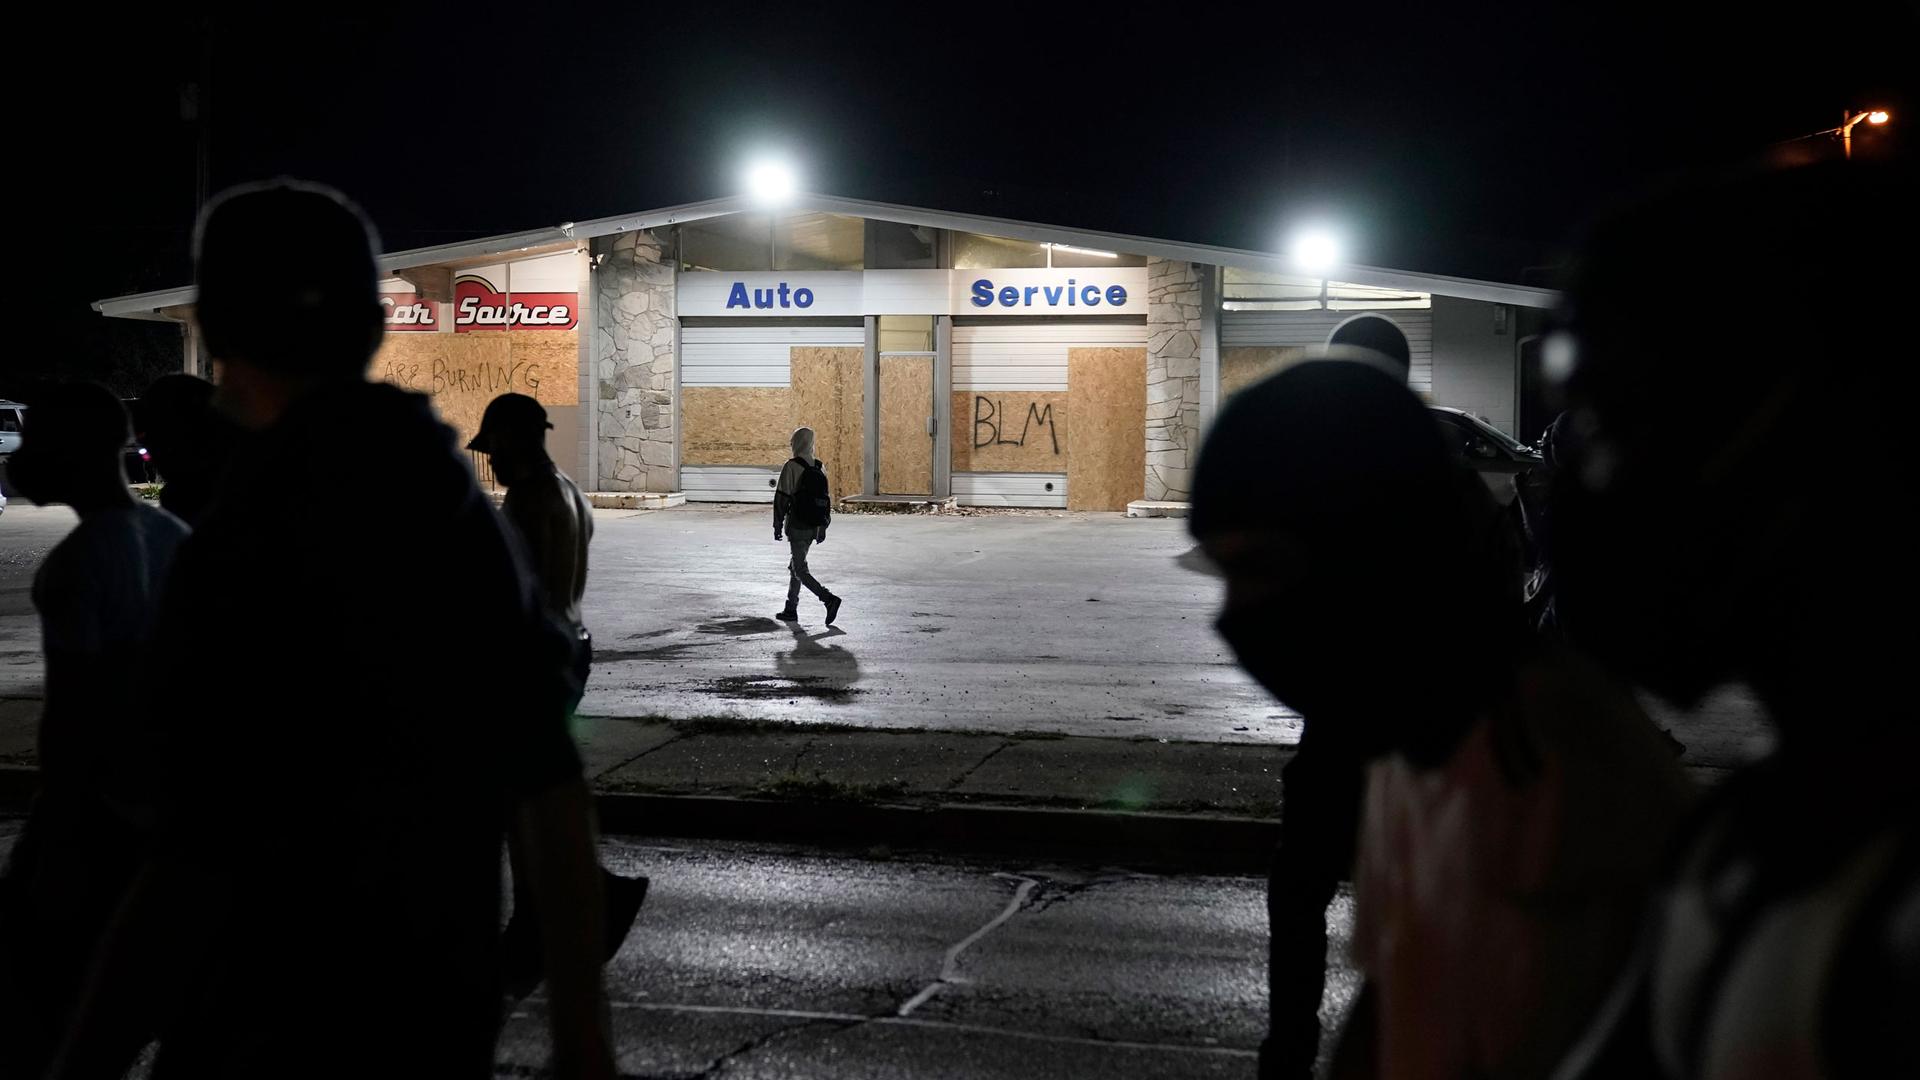 Several people are shown in shadow with a automobile service center stands in the background with boarded up windows.